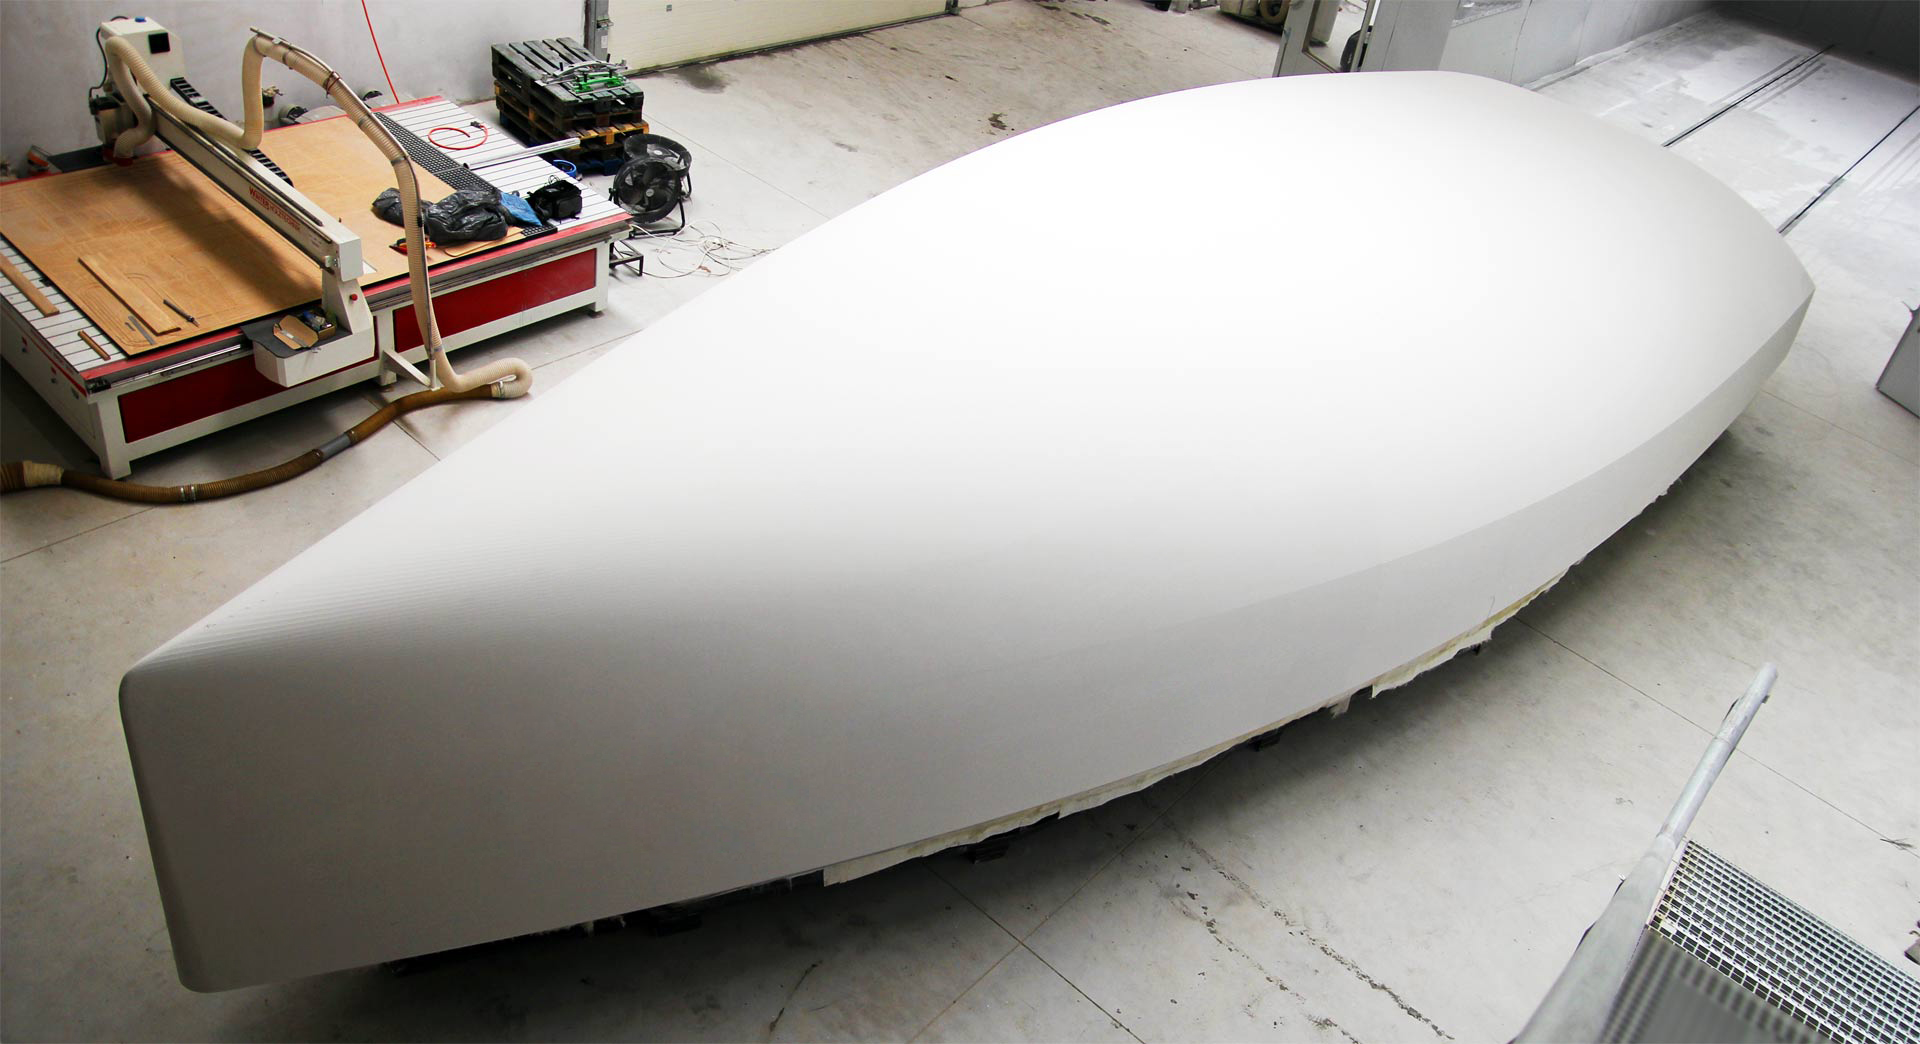 Perfectly sanded hull